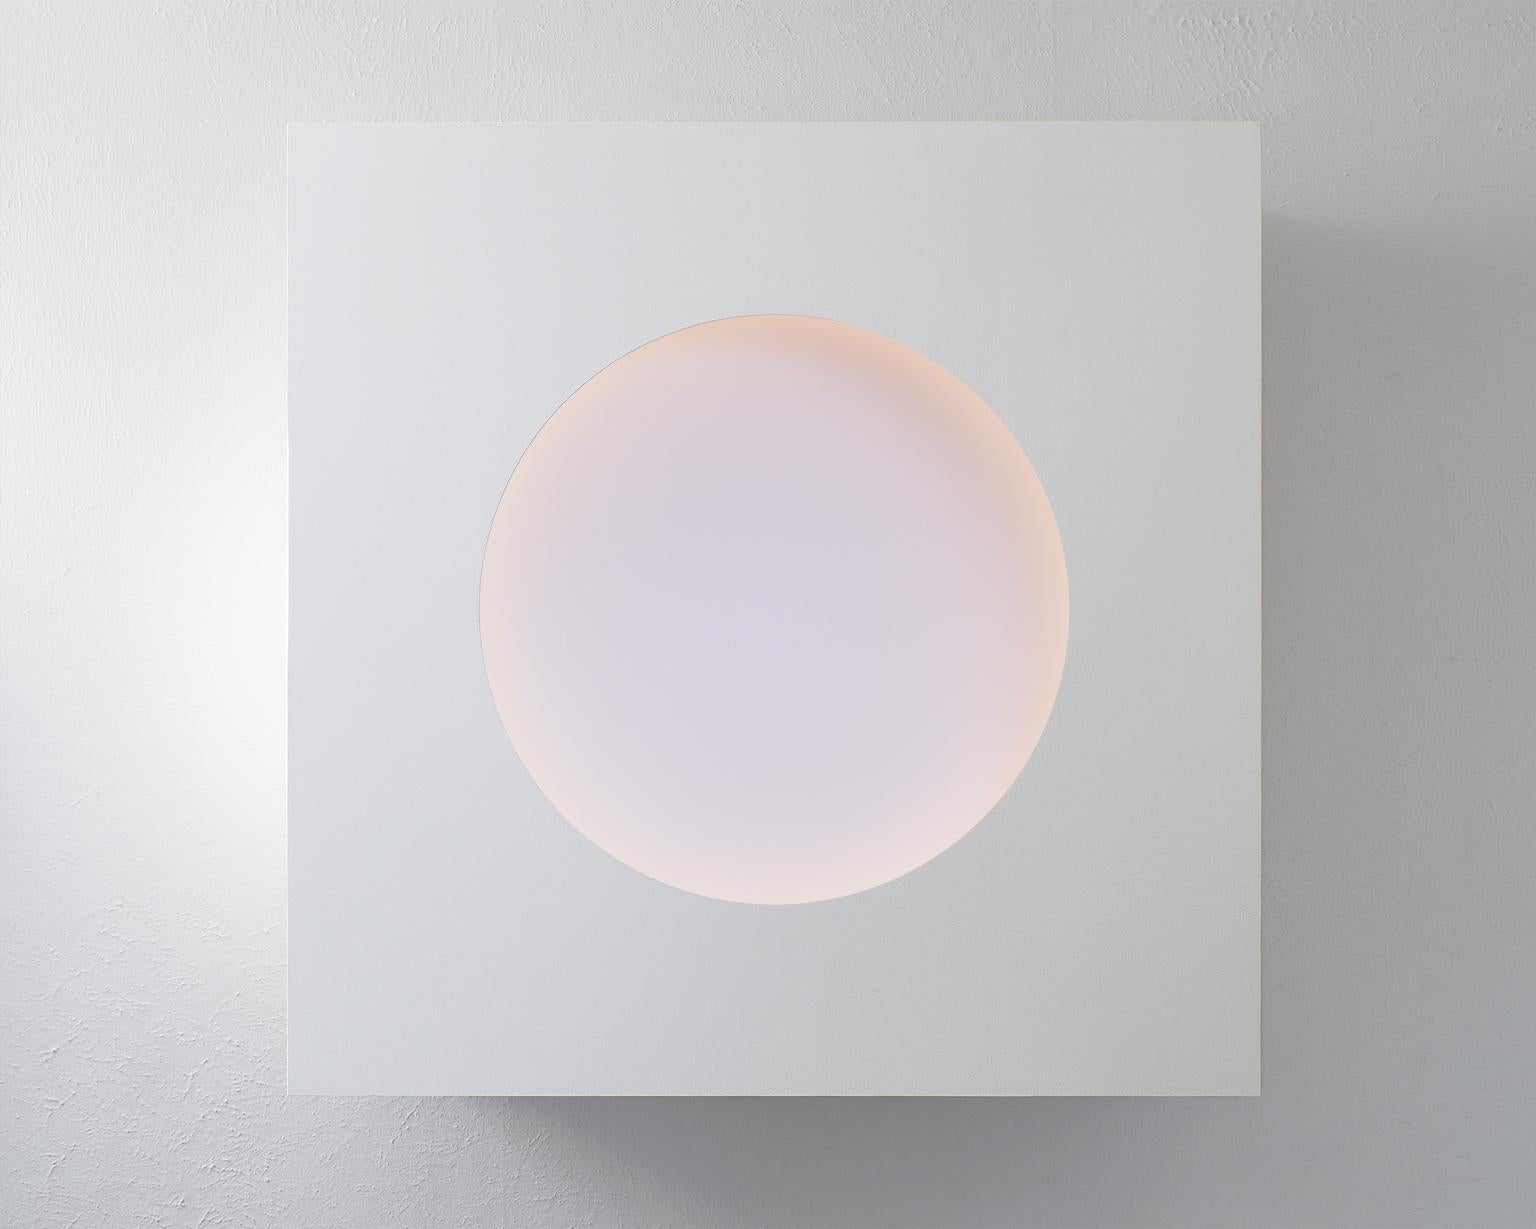 Raymond Graber‘s celestial light sculptures transform the sense of perception, challenging the human eye’s sense for scale and time with a transcendental perceptual experience. The kinetic light sculpture One Light (2022) incorporates lightwaves as